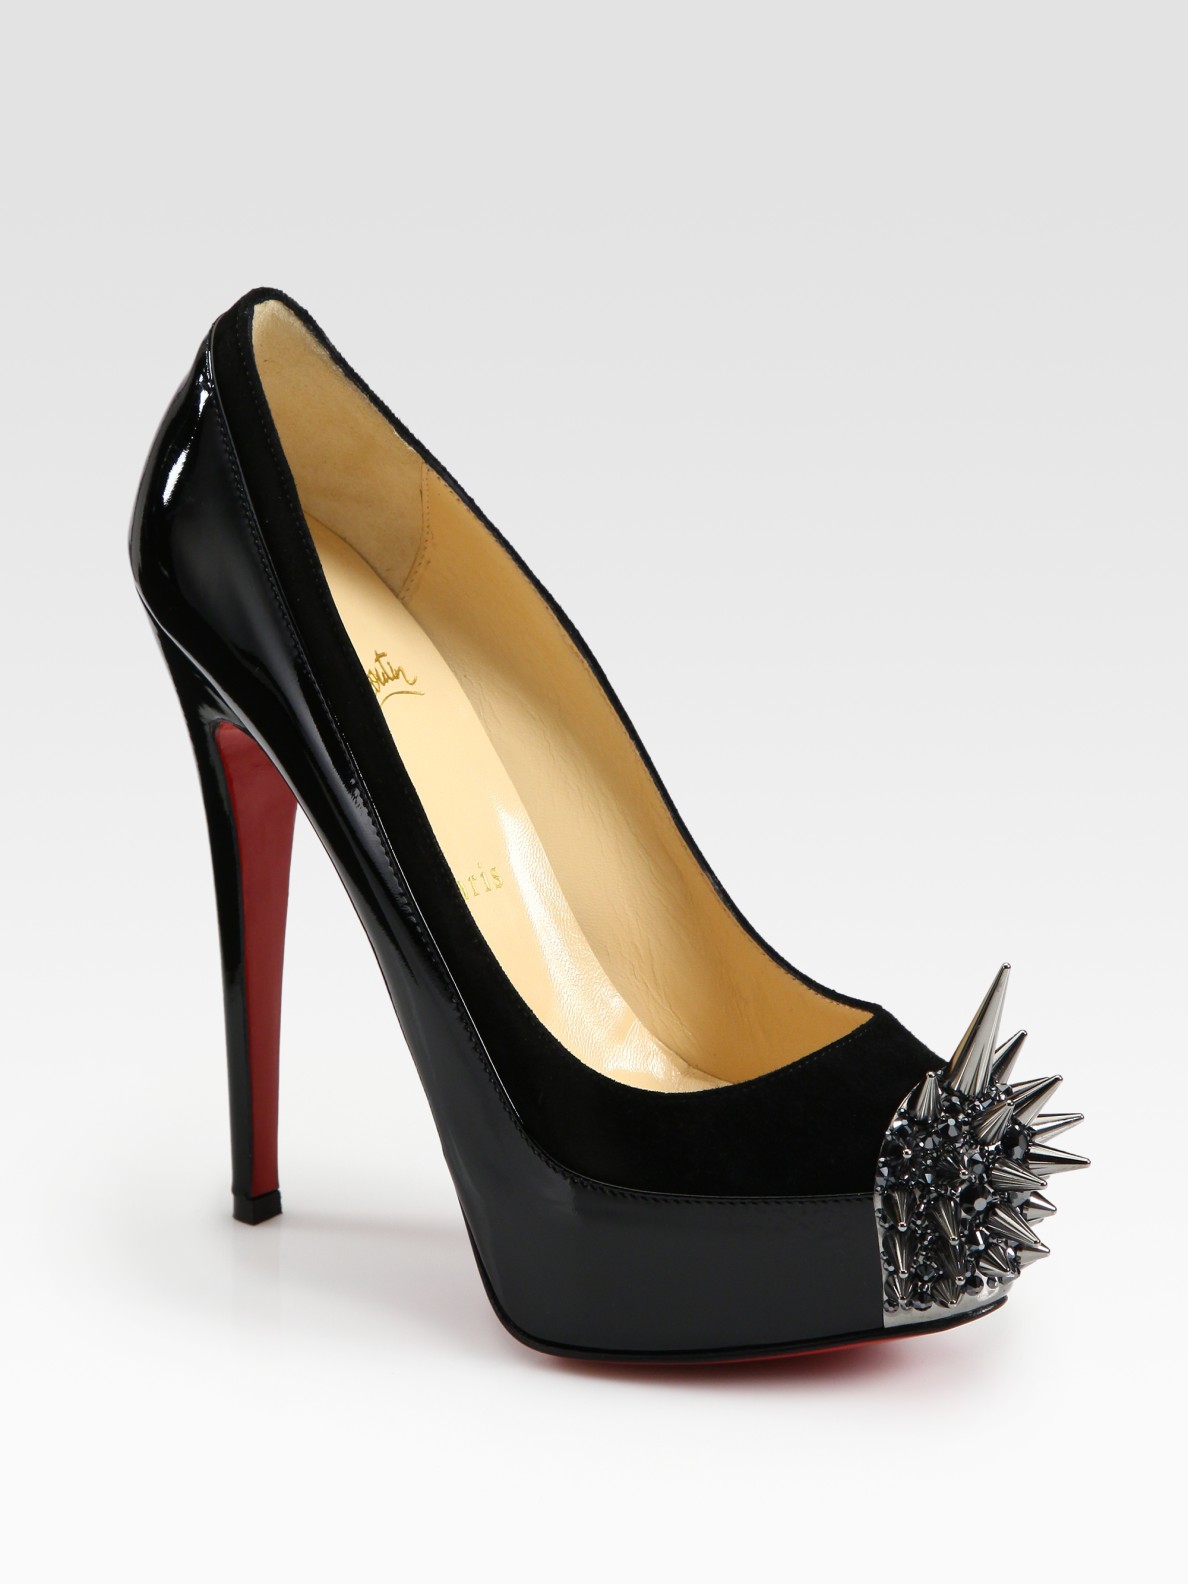 Shoeniverse: TFL - Sold Out Asteroid pumps by Christian Louboutin